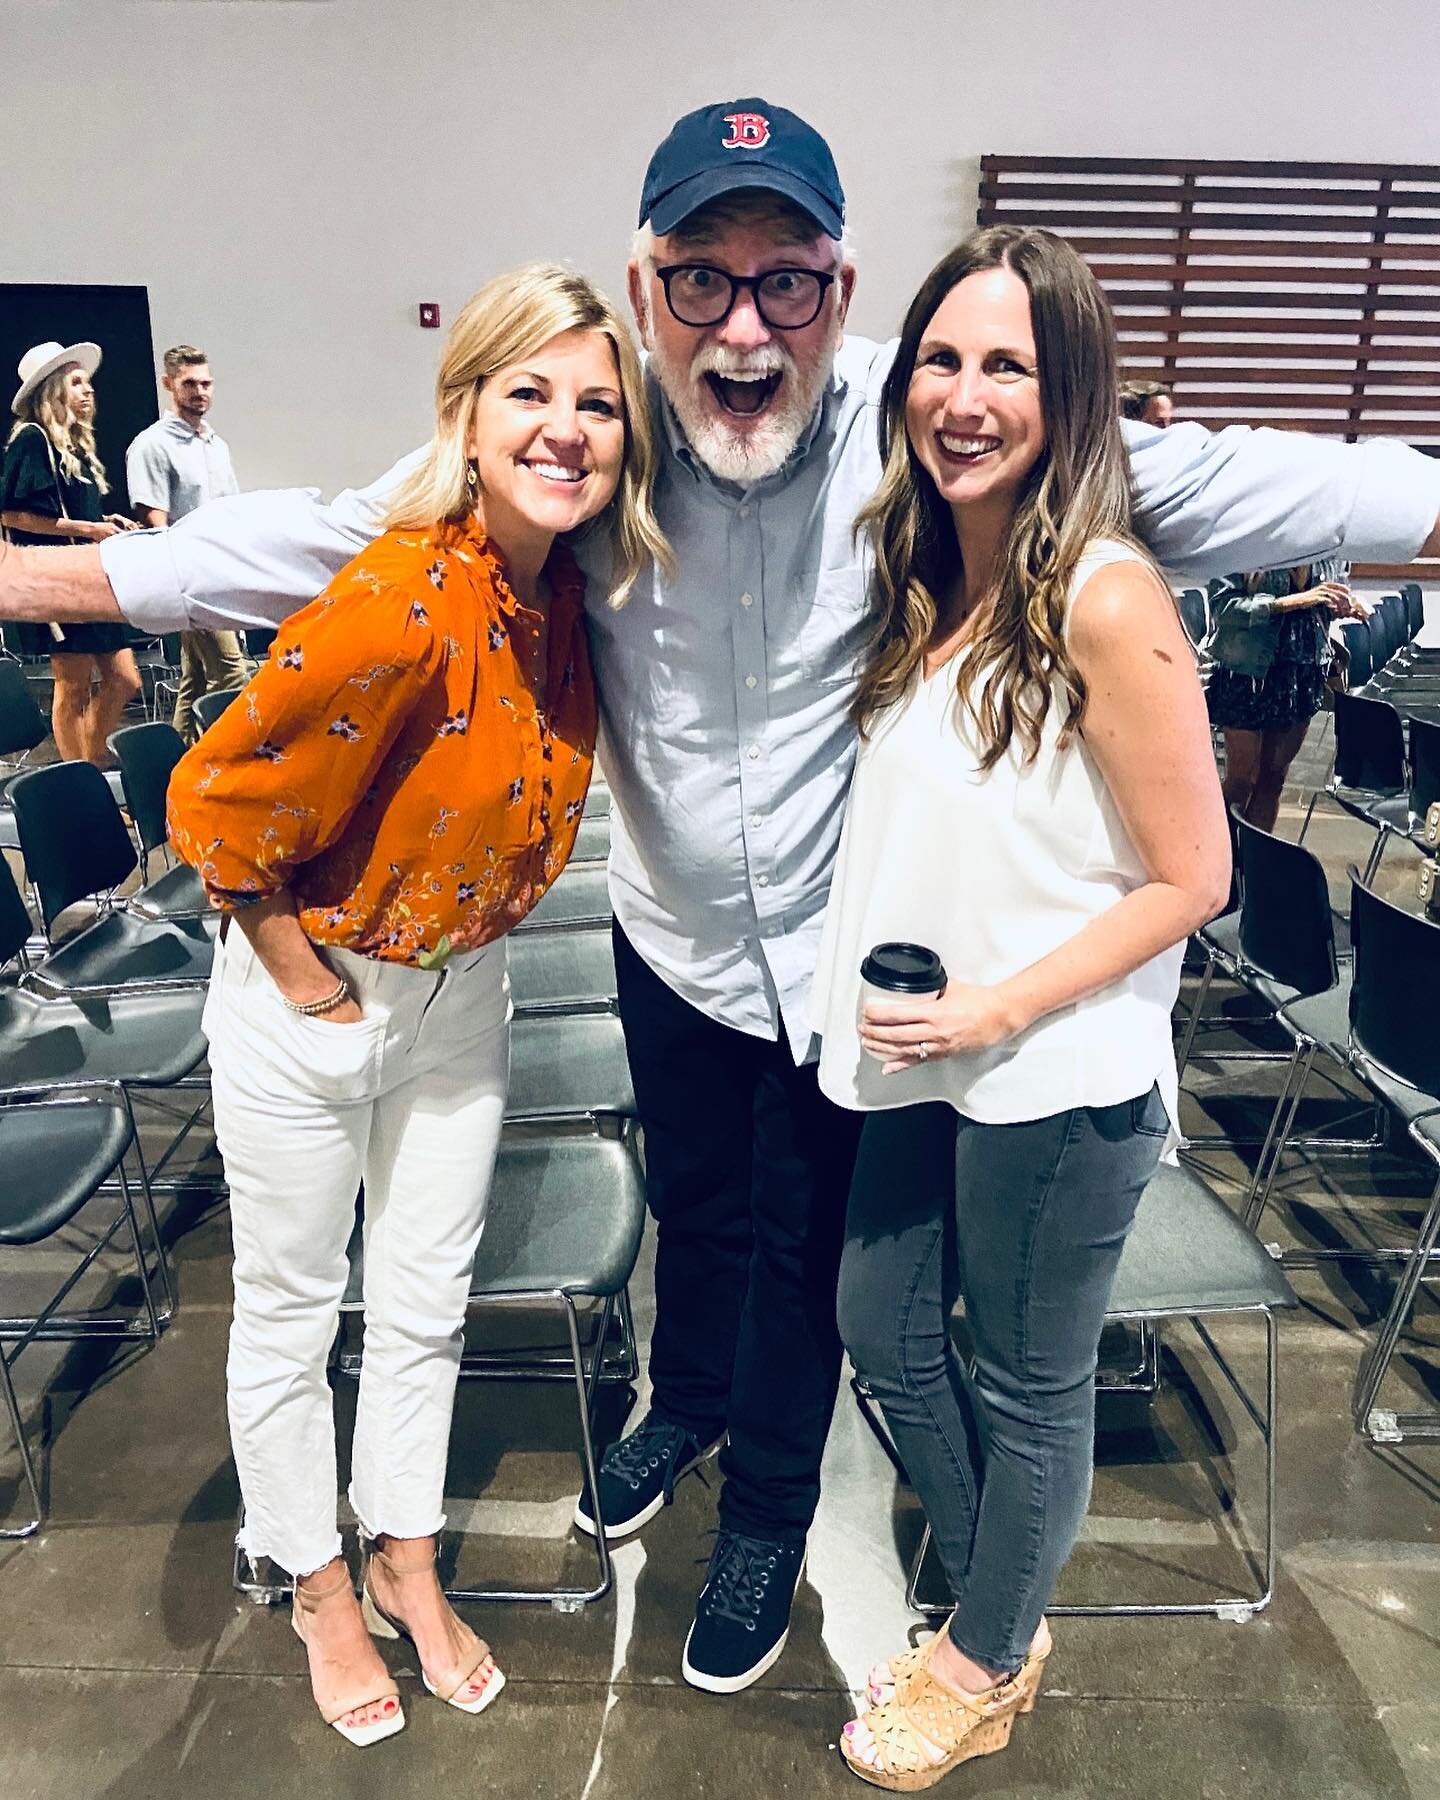 I&rsquo;m so behind on my posting (right @eredmond9 ??😆) that I still haven&rsquo;t posted about the time a few weeks ago when I met one of my modern day heroes @bobgoff !
Bob, you are legend in our house and especially in my car rides with the girl